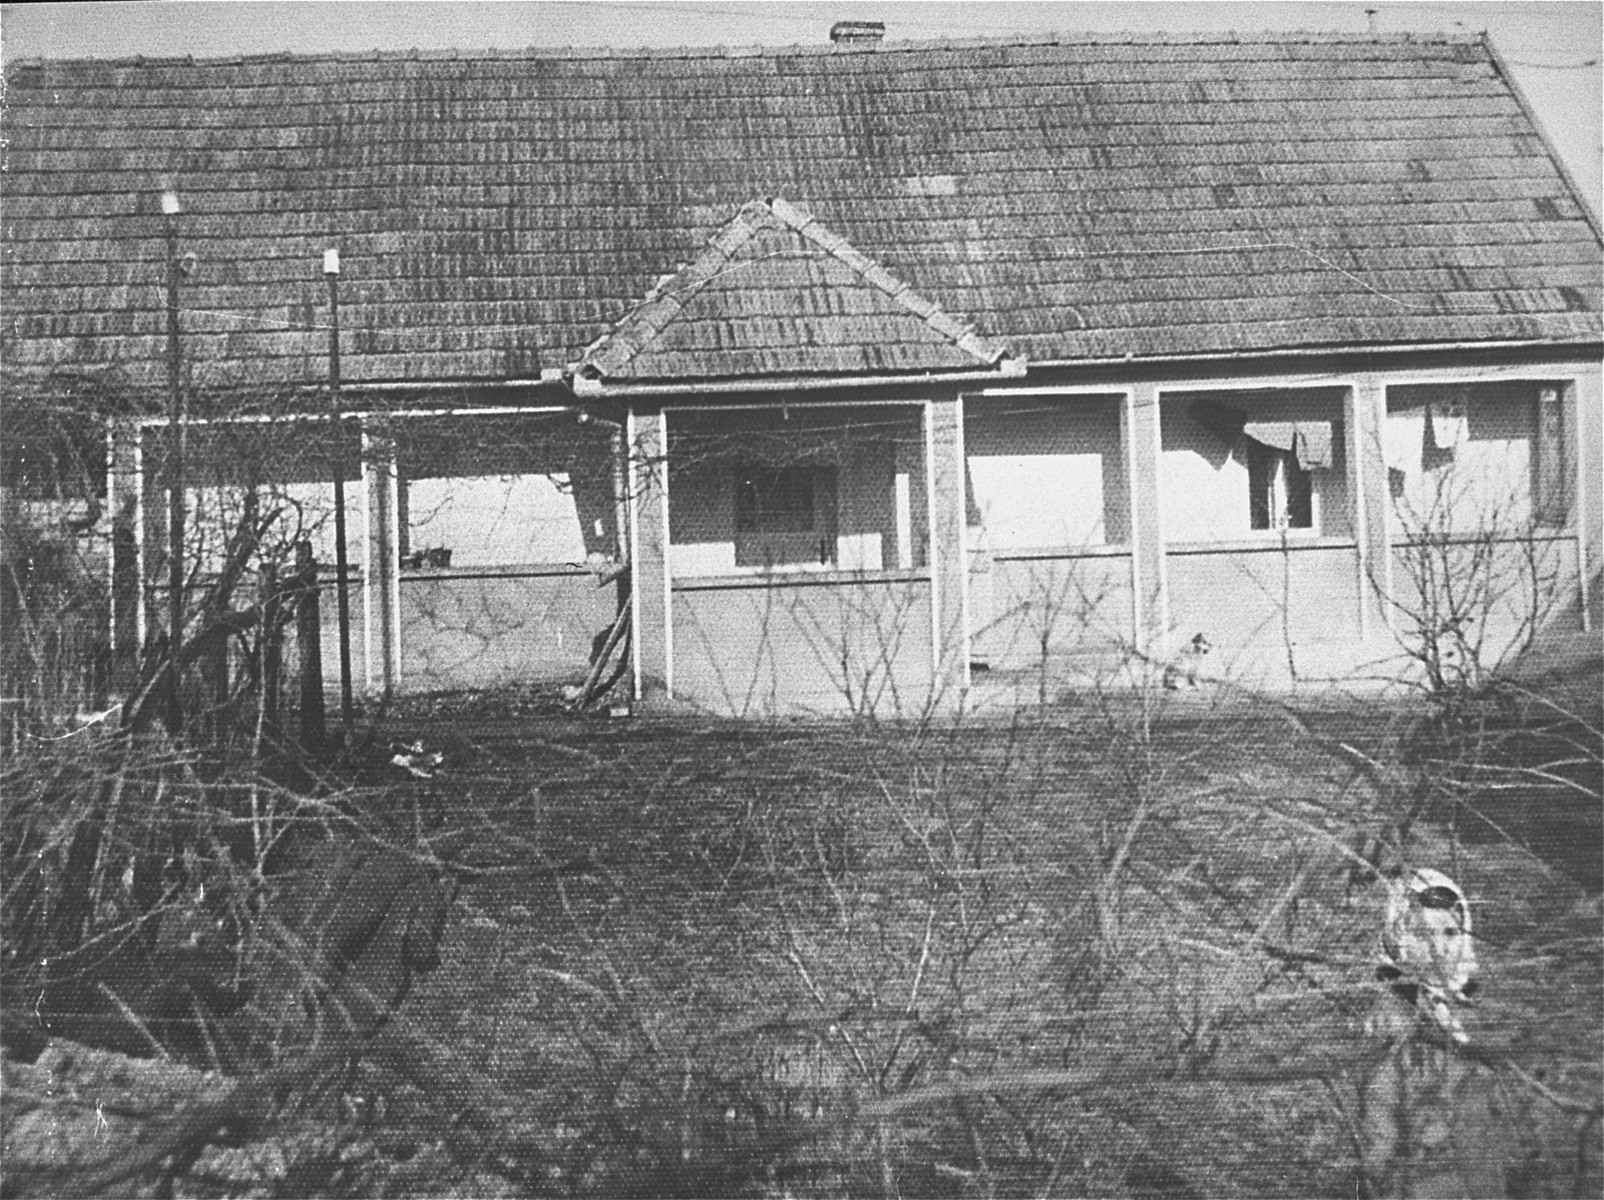 A house in Sarmas in which Romanians and Jews were tortured by Hungarians during the Sarmas pogrom.

Sarmas, located in Transylvania along the Hungarian border, had a Jewish population of only 126 in 1944.  When the Hungarian Army occupied Sarmas on 5 September 1944, the population of the town pillaged all the Romanian and Jewish homes in Sarmas.  On September 8th, the Jews were ordered to mark their homes with a yellow Star of David, whereafter they were rounded-up by Hungarian peasants from the town.  The Jews were taken to the courtyard of a Romanian construction foreman, beaten severely, and then forced to work.  On September 16th, 20 Jewish men were selected to dig mass graves.  That evening, the 126 Jews of Sarmas were killed and buried.